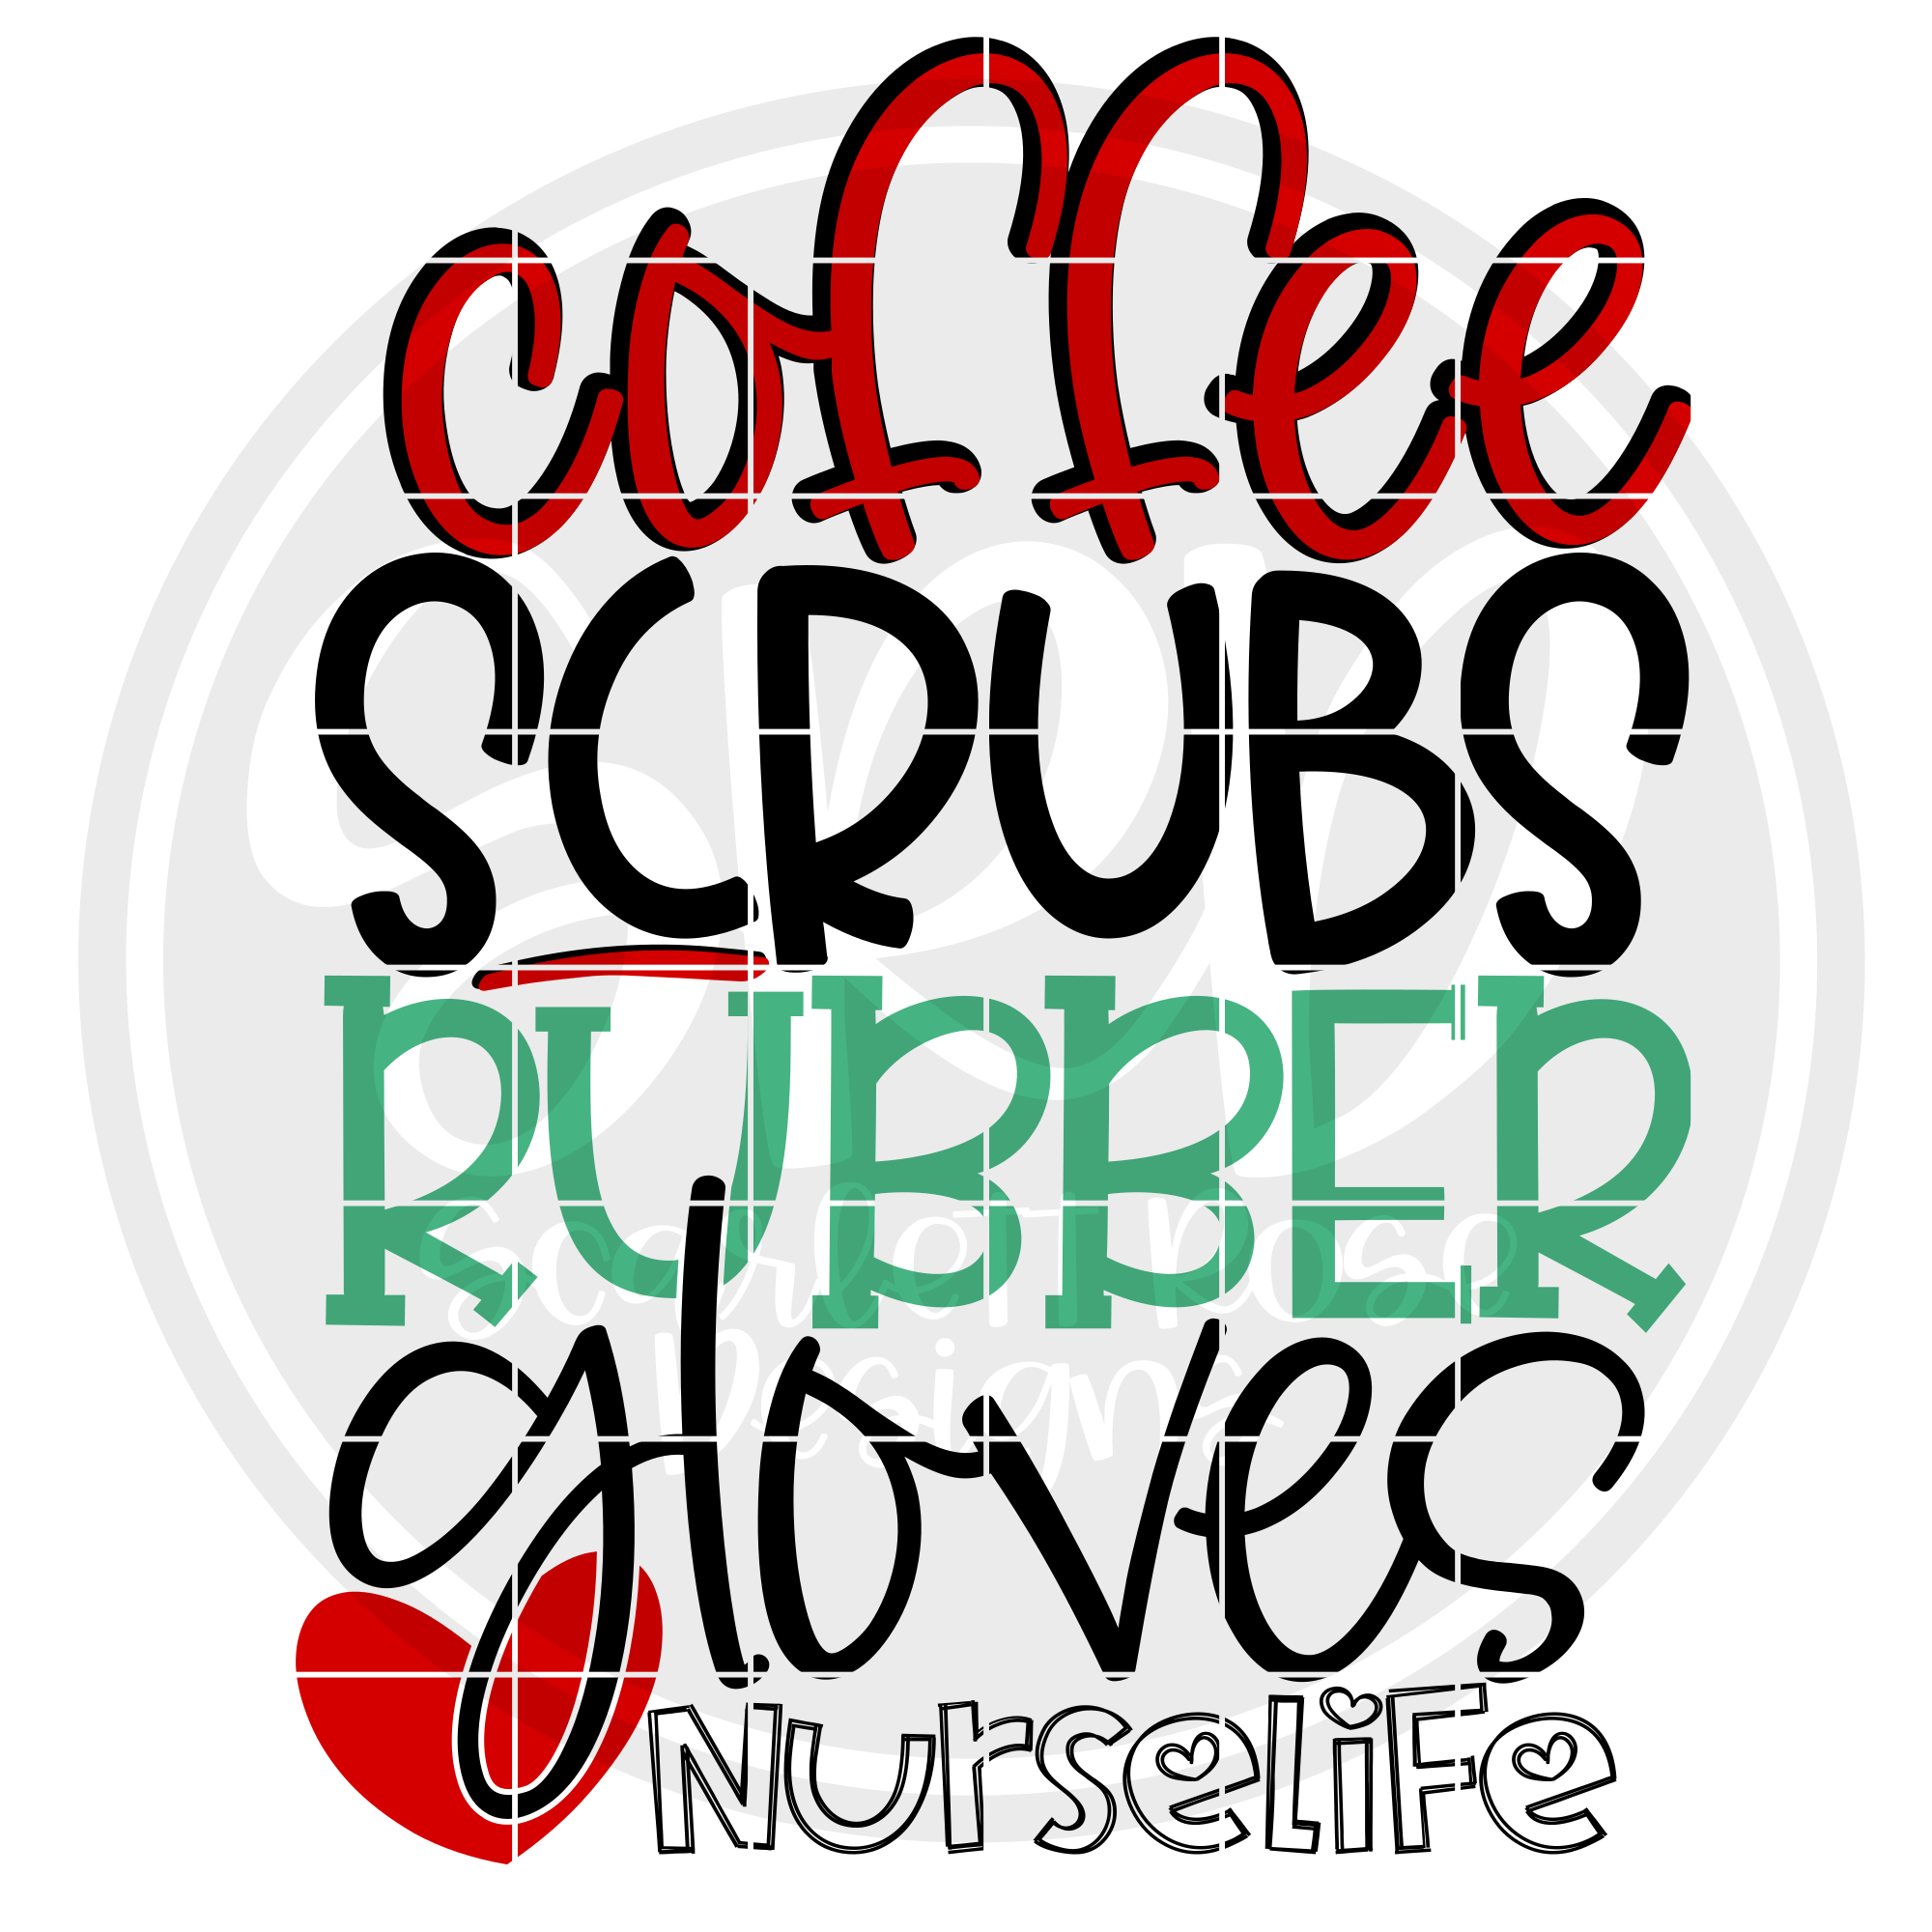 Free Free 259 Free Design Coffee Scrubs And Rubber Gloves Svg Free SVG PNG EPS DXF File